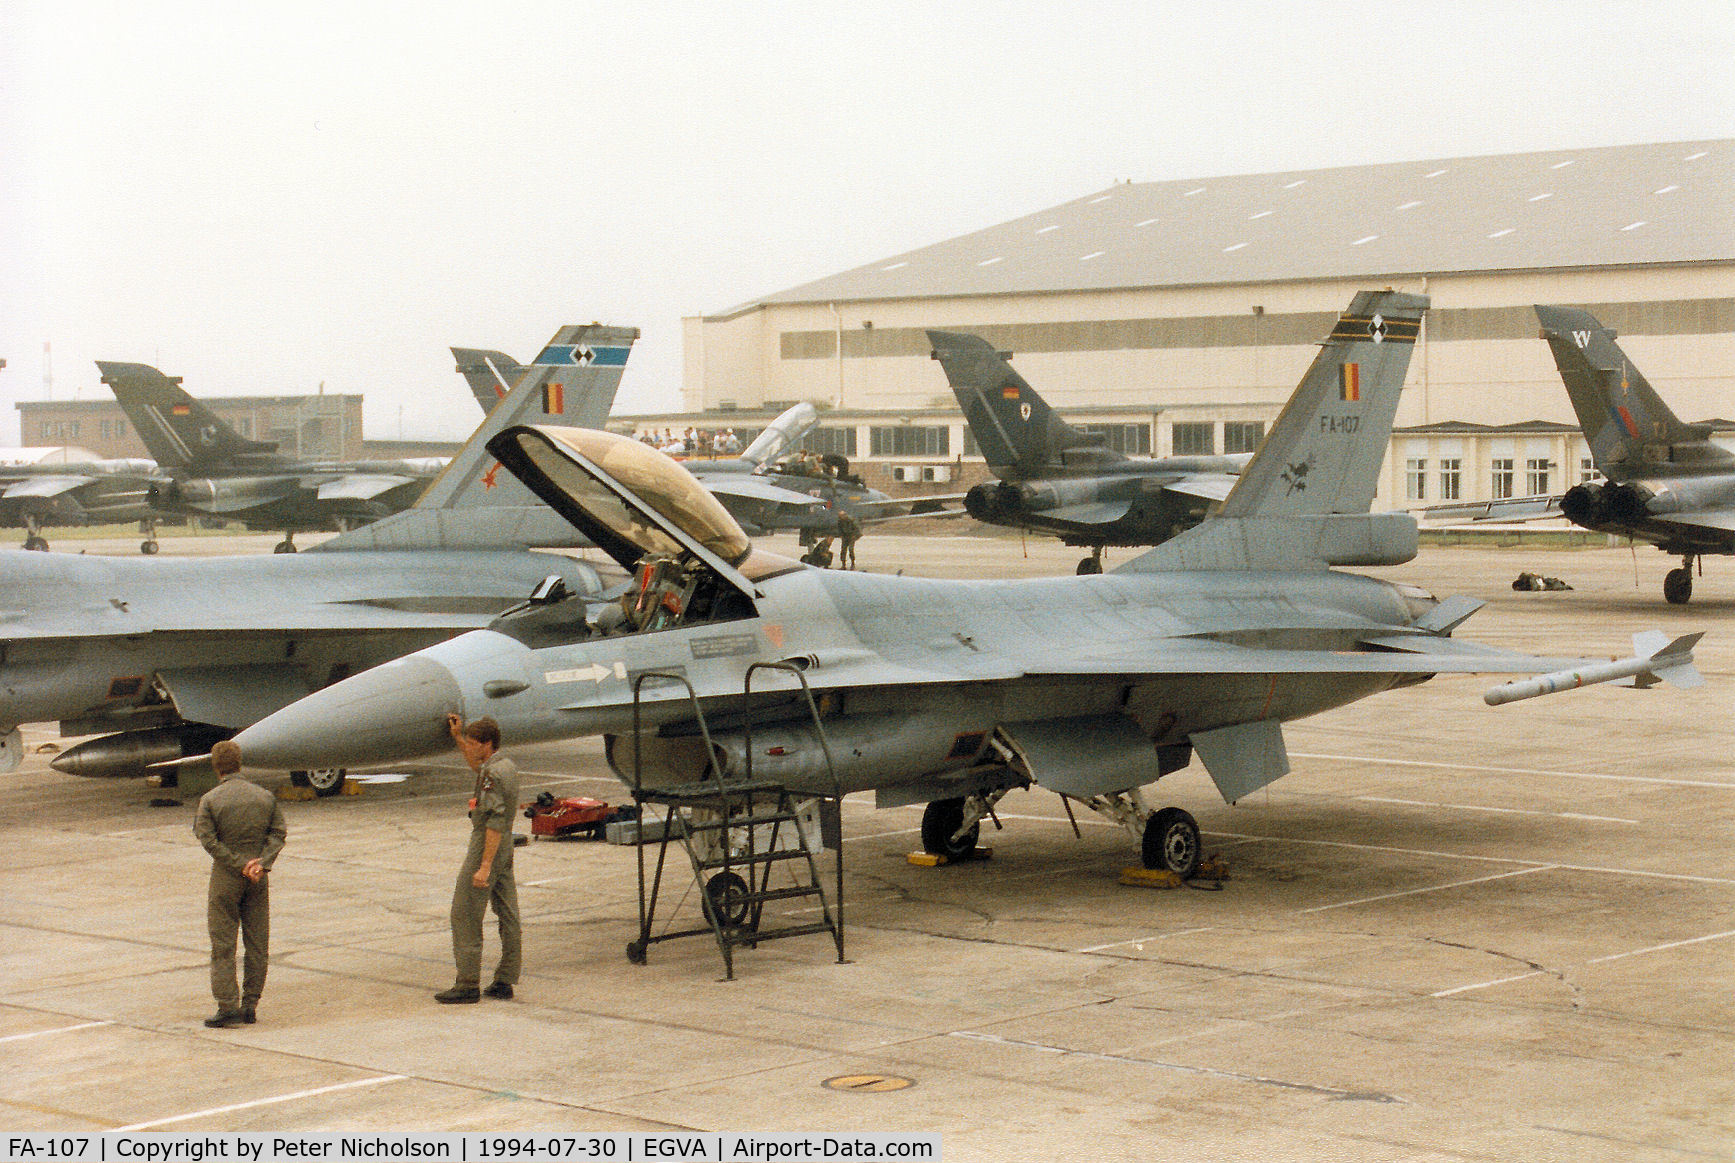 FA-107, 1980 SABCA F-16AM Fighting Falcon C/N 6H-107, F-16A Falcon, callsign Viper, of the Belgian Air Force's 1 Squadron/2nd Wing on the flight-line at the 1994 Intnl Air Tattoo at RAF Fairford.